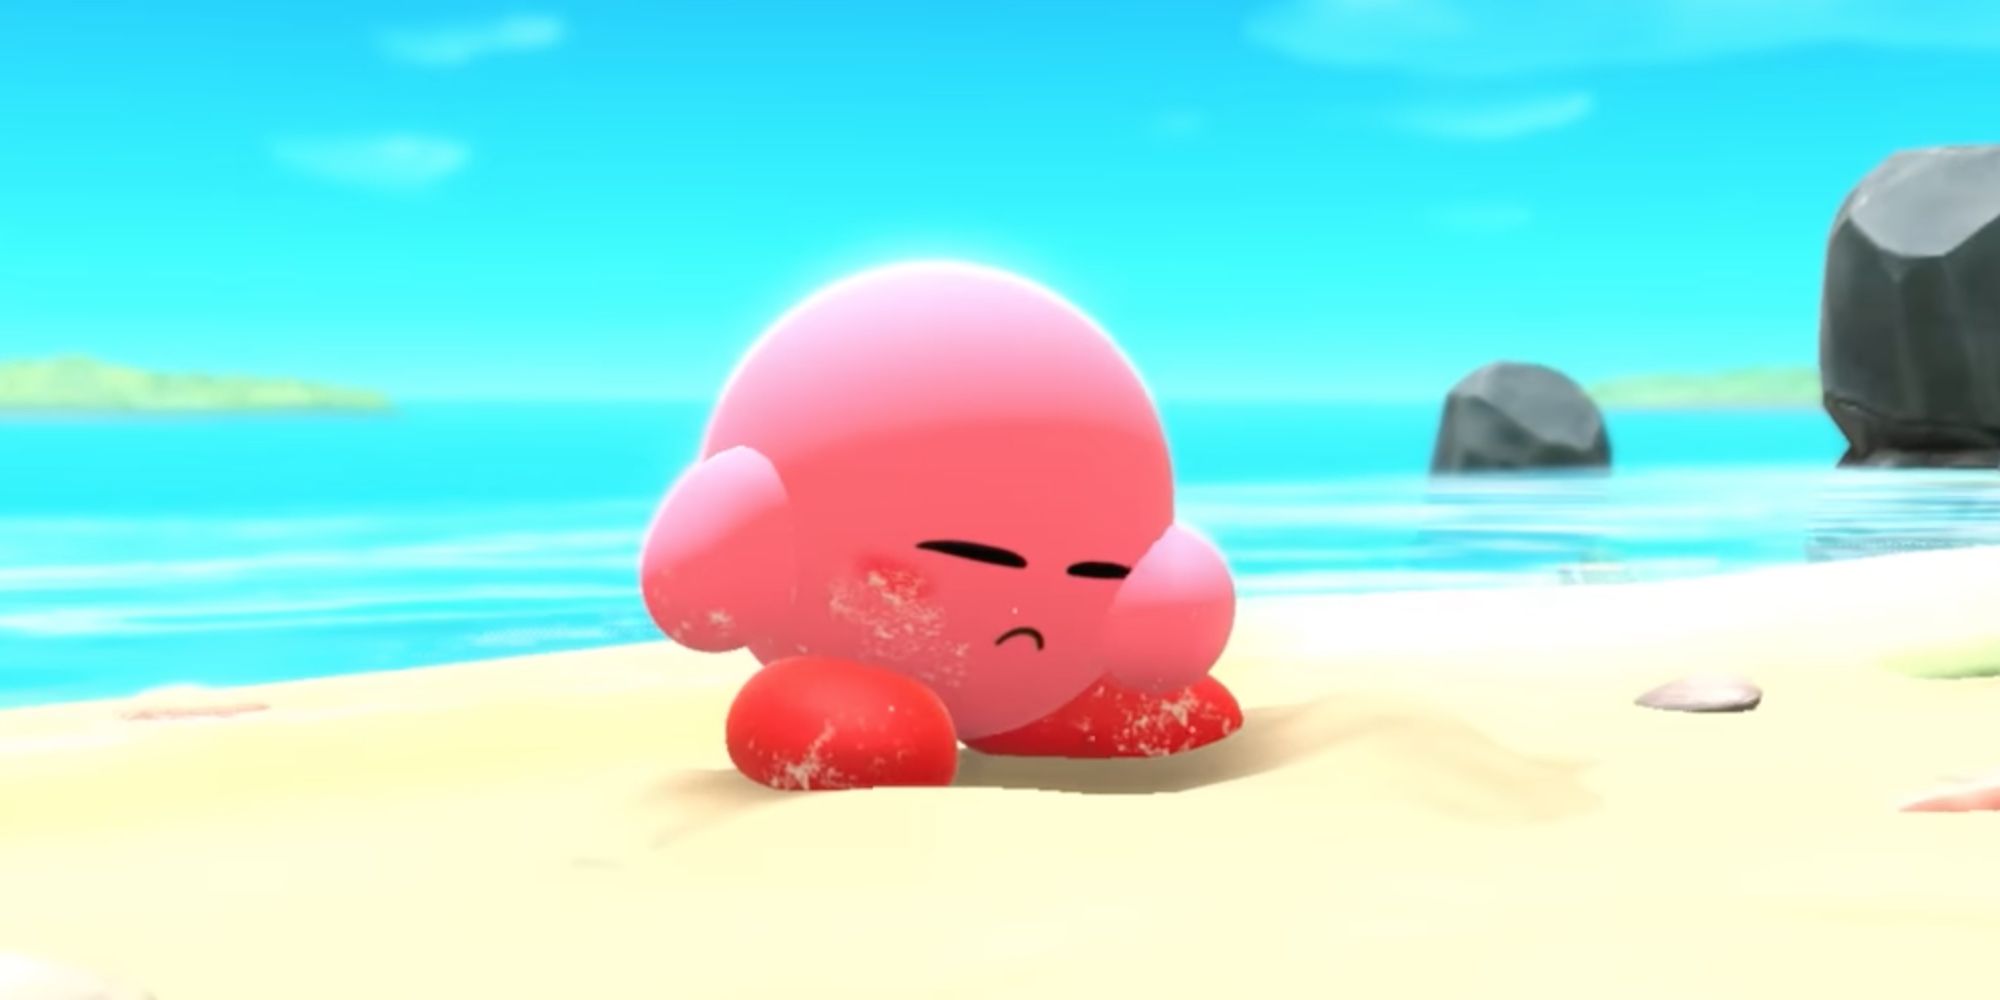 Kirby from Kirby and the Forgotten Land